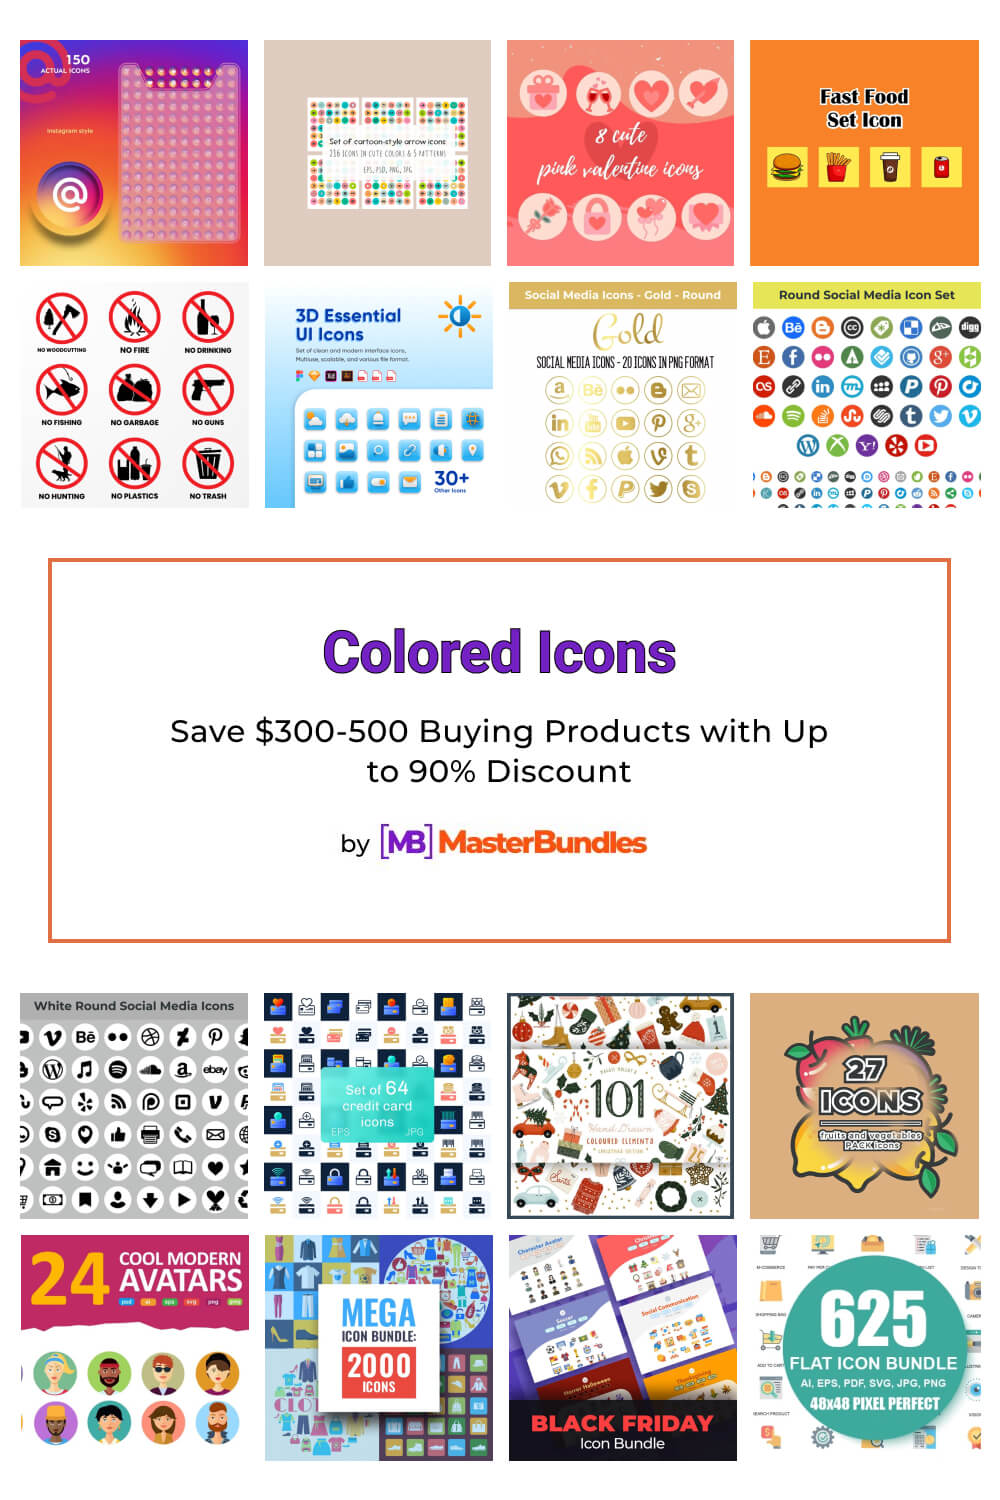 colored icons pinterest image.